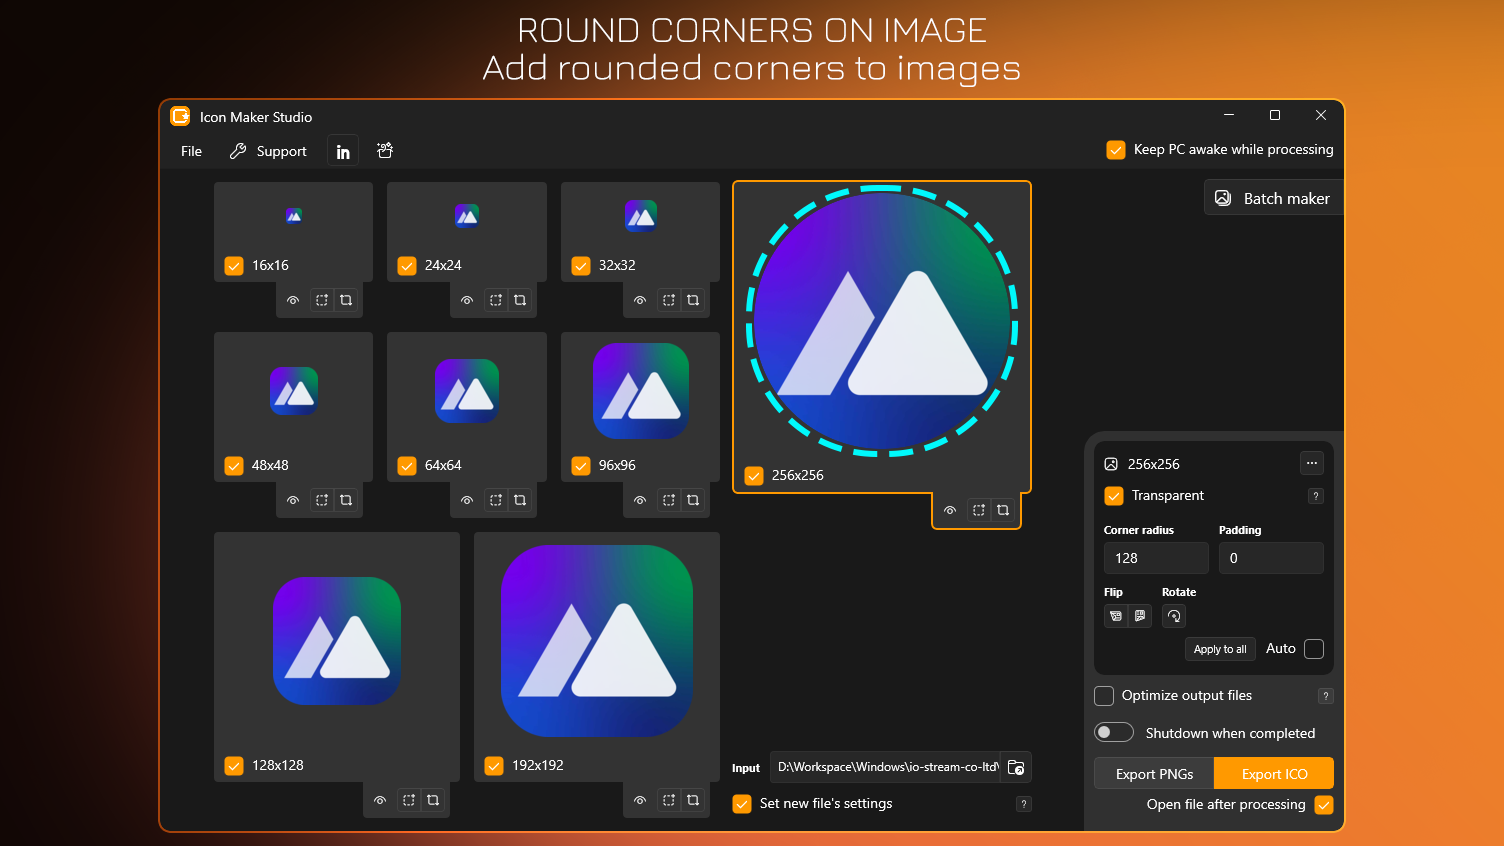 Round Corners on Image - Add rounded corners to images